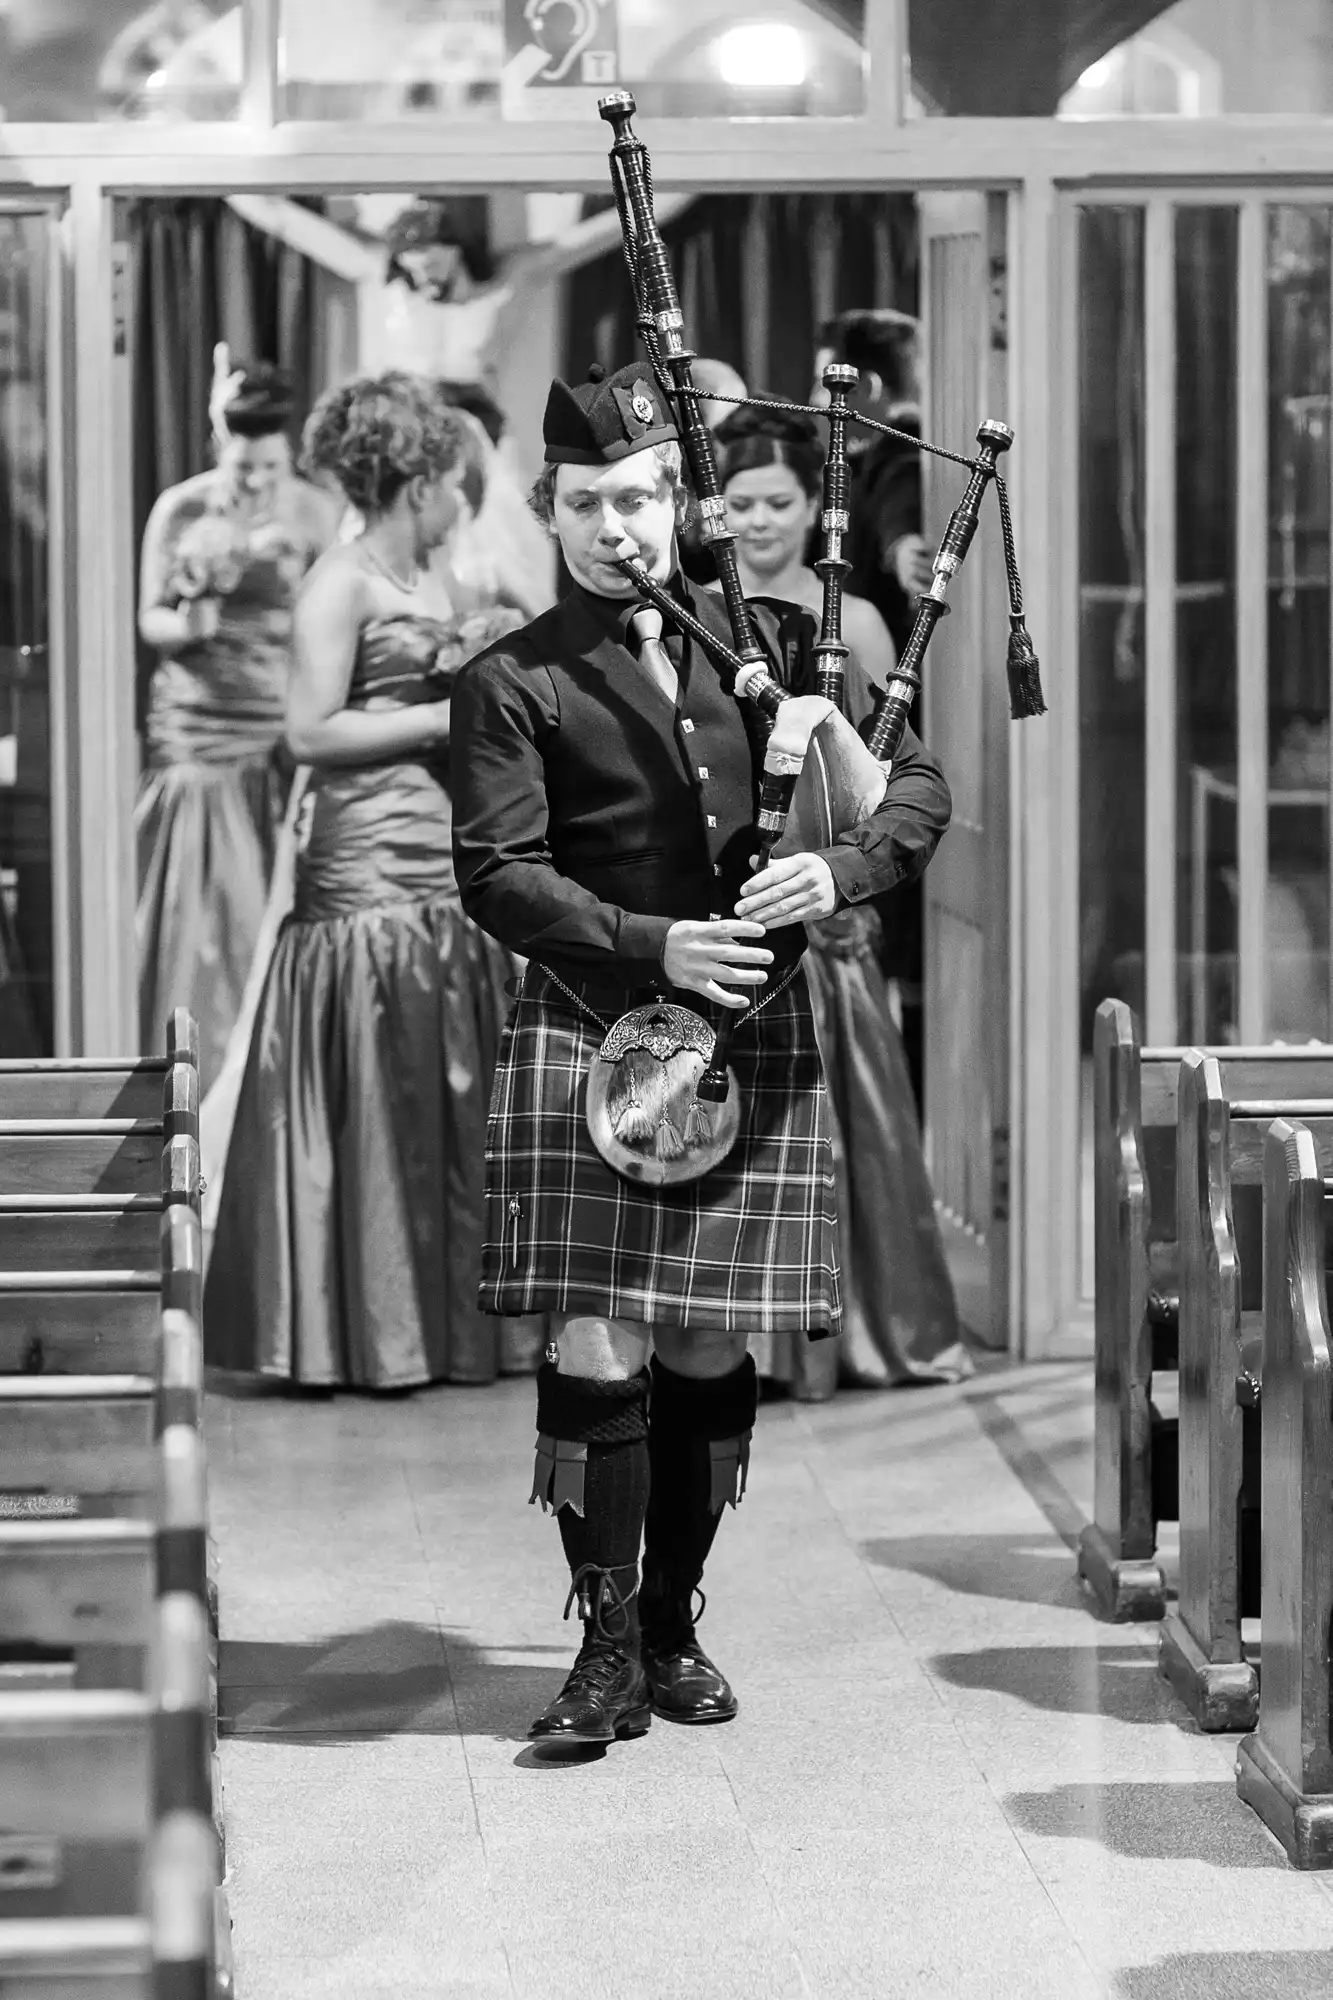 A bagpiper in traditional scottish attire plays inside a venue with people in the background.